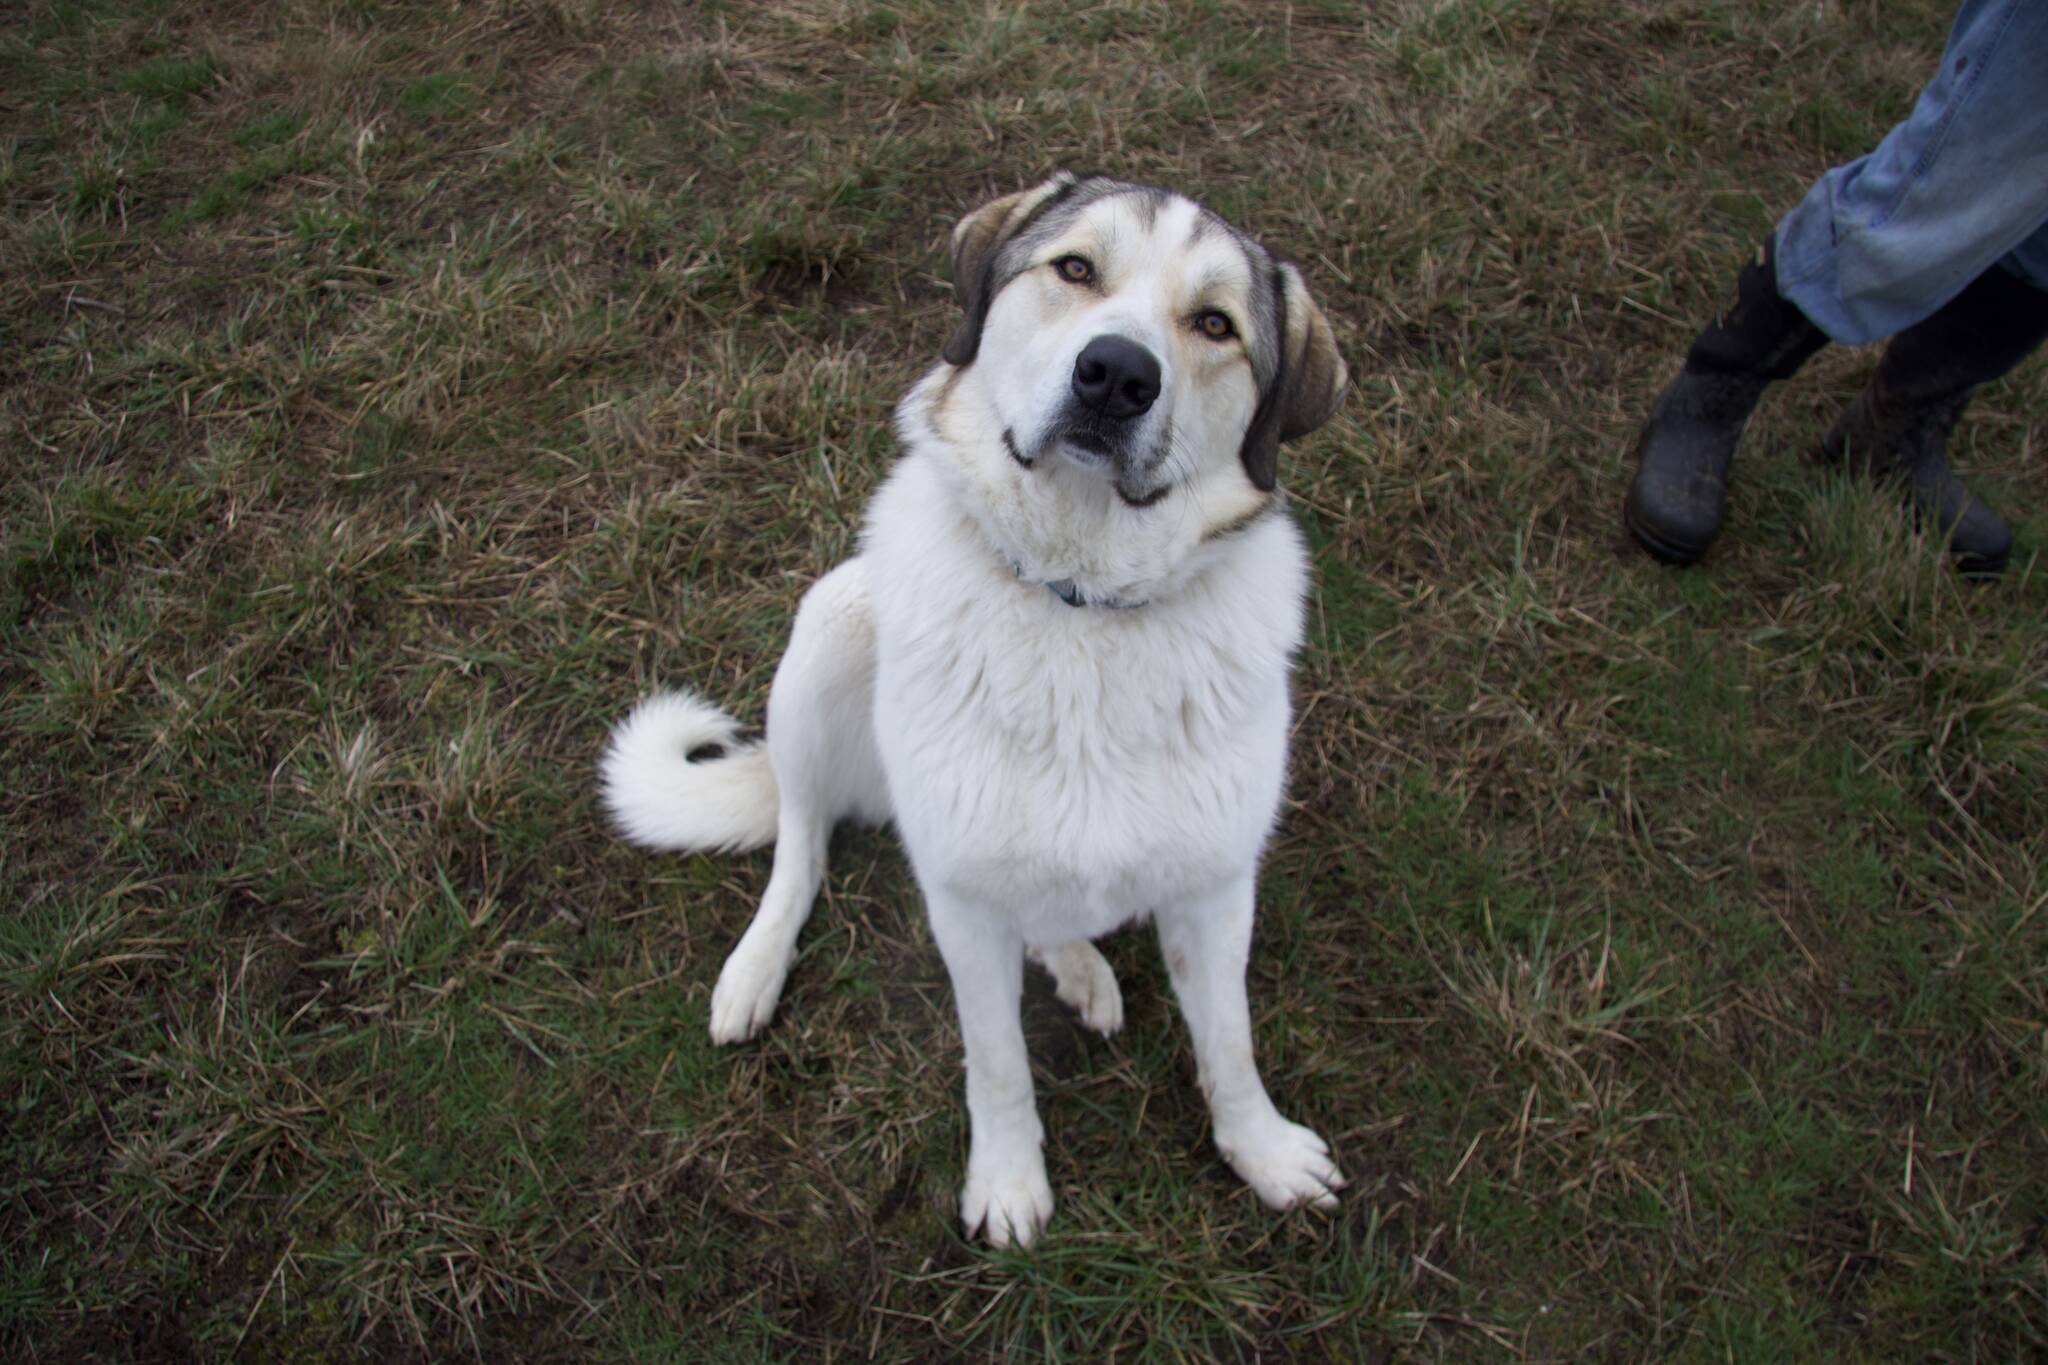 Cooper is the livestock guardian dog for the chickens at One Willow Farm.